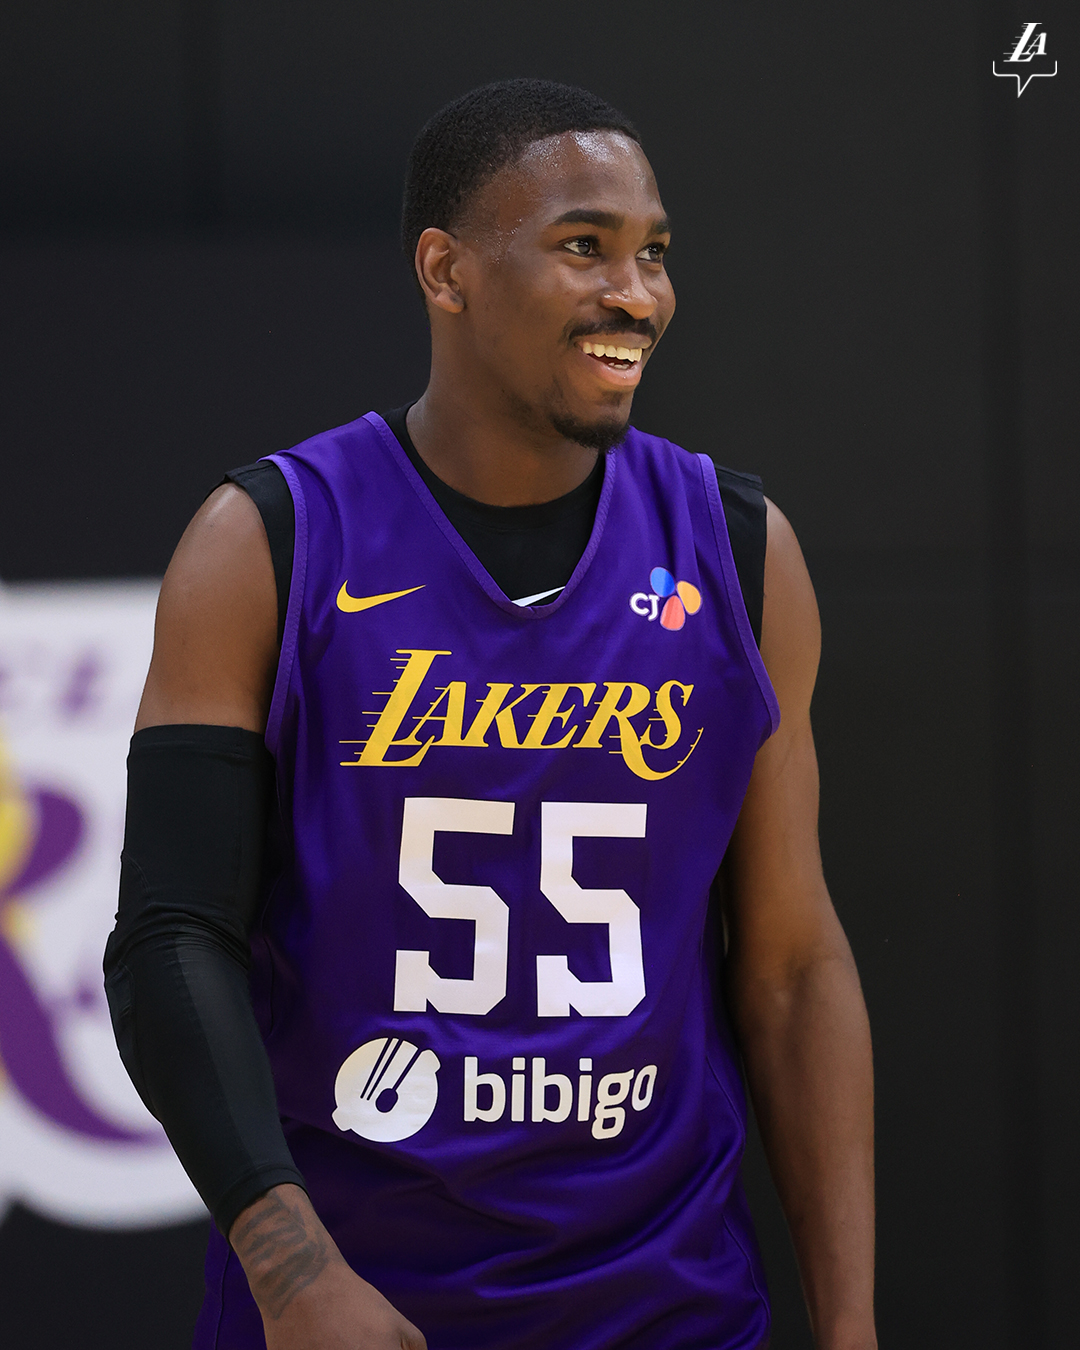 D'MOI OFFICIALLY LISTED ON LAKERS SUMMER LEAGUE ROSTER 284 Media